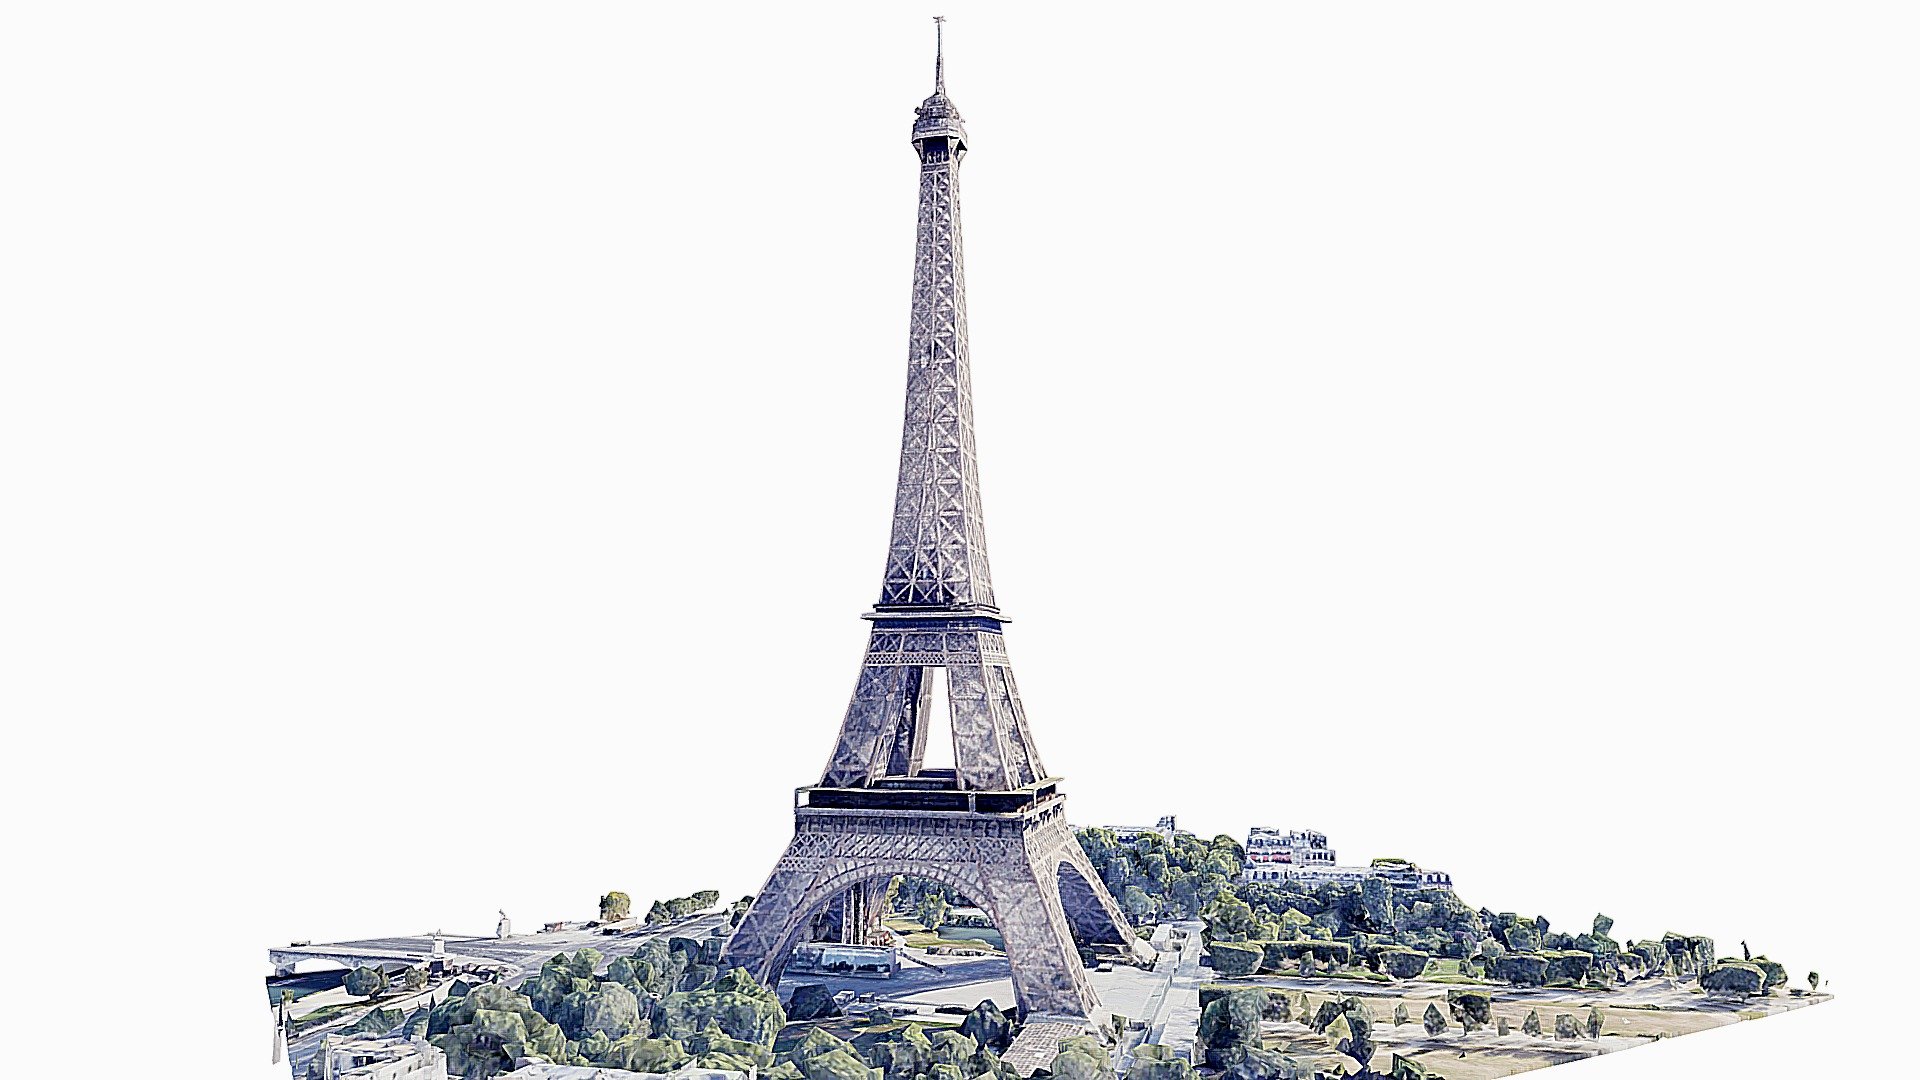 The Eiffel Tower, French: tour Eiffel, is a wrought-iron lattice tower on the Champ de Mars in Paris, France. It is named after the engineer Gustave Eiffel, whose company designed and built the tower.

https://en.wikipedia.org/wiki/Eiffel_Tower - Torre Eiffel,scan,landscape,París,map - 3D model by SENSIET (@asensio) 3d model